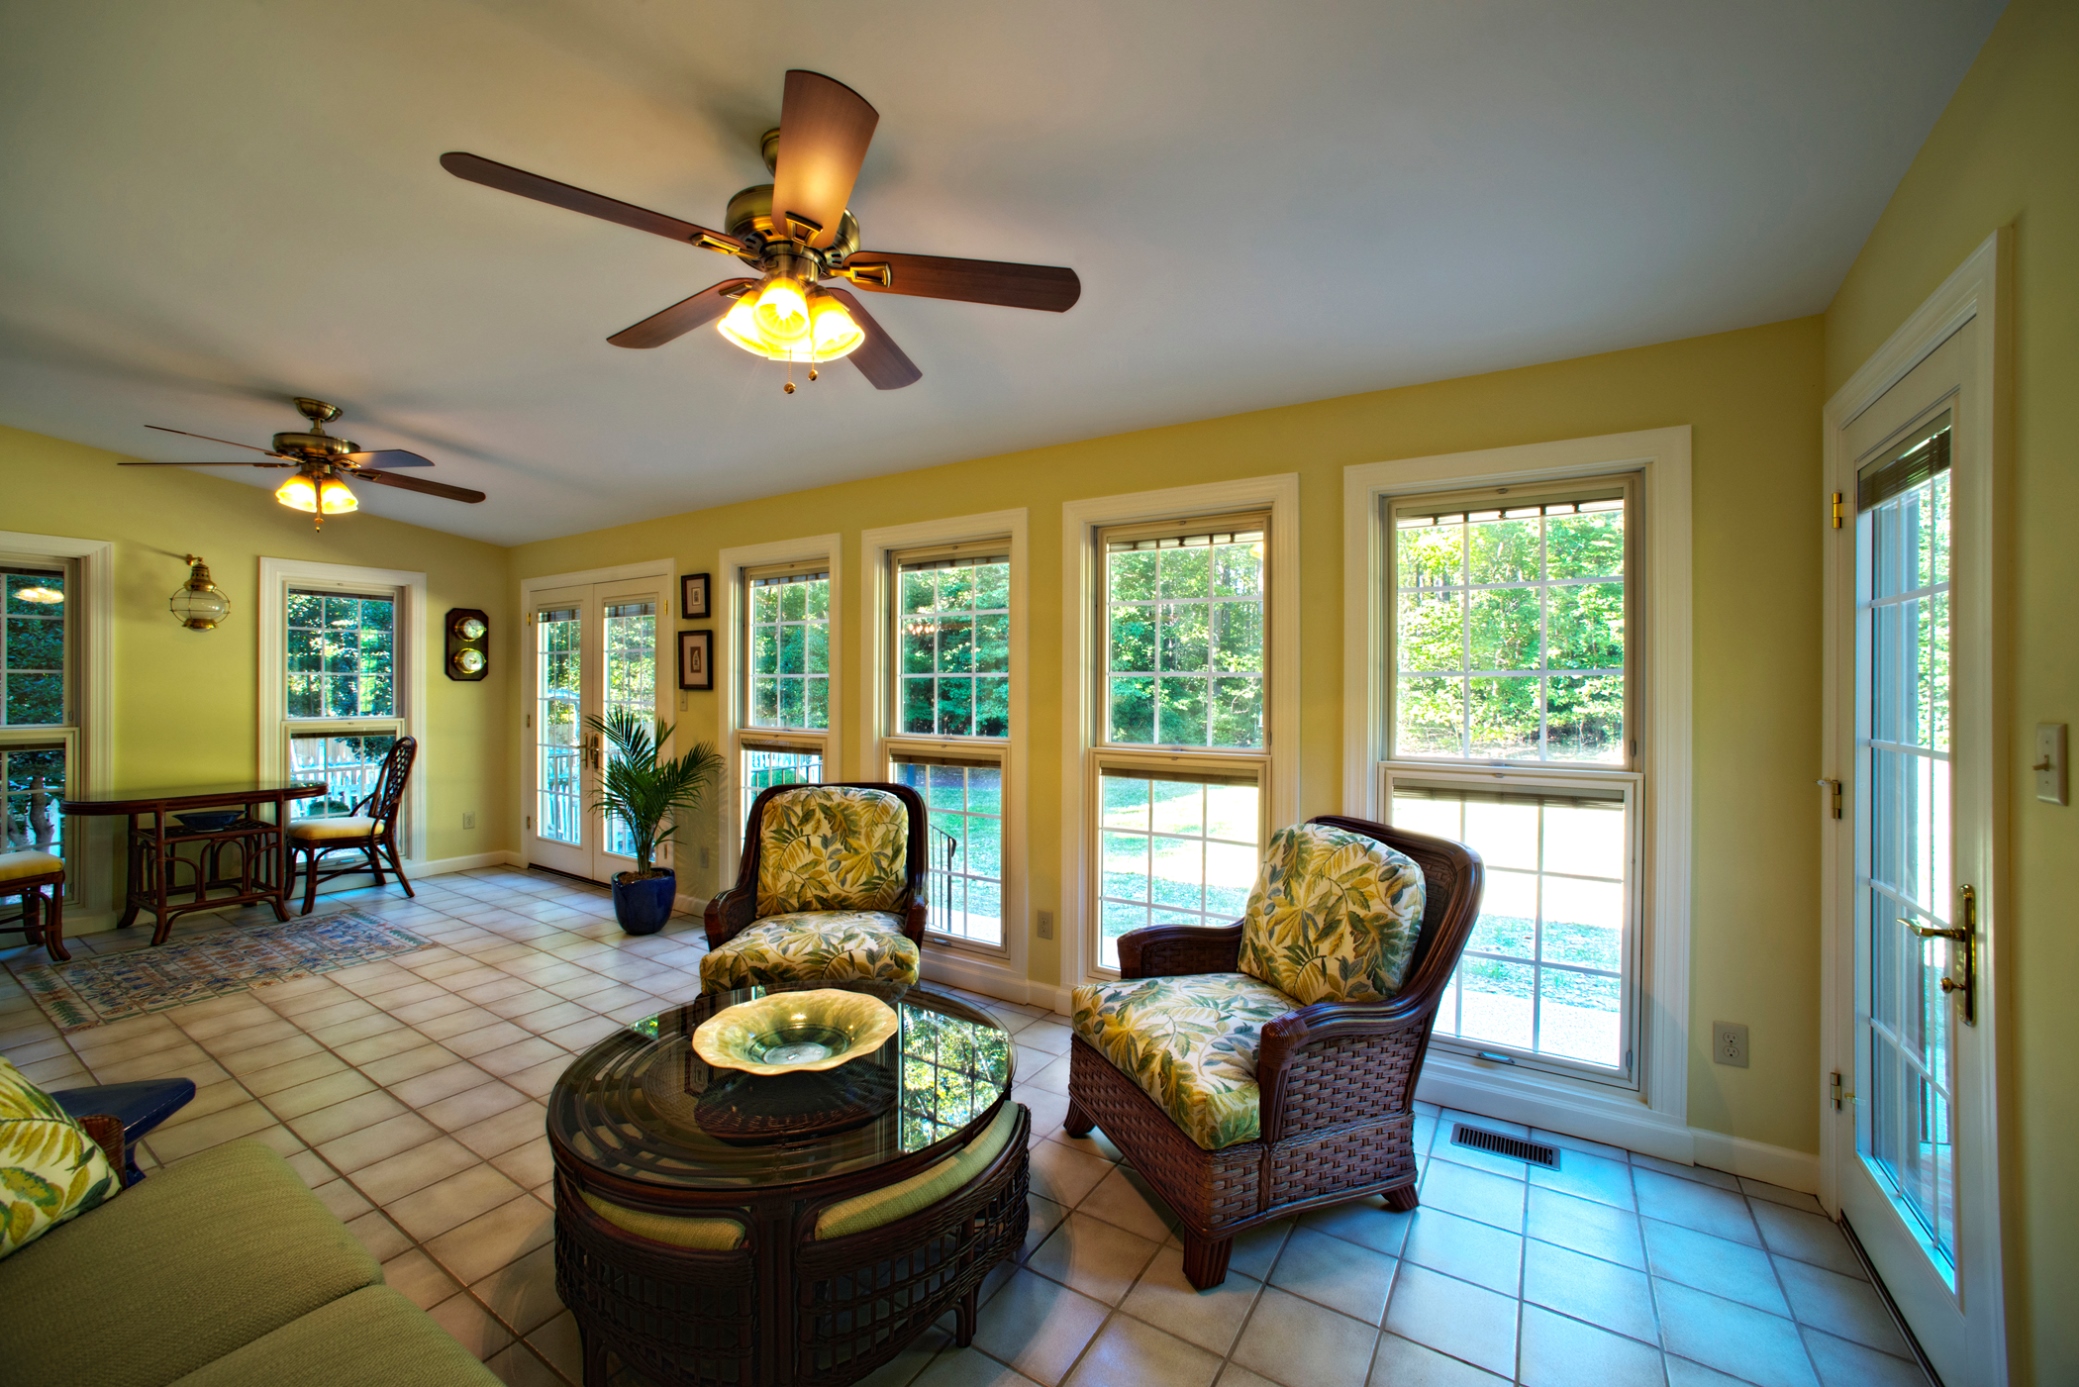 Sunroom Addition Is Gorgeous Check Out The Italian Tile